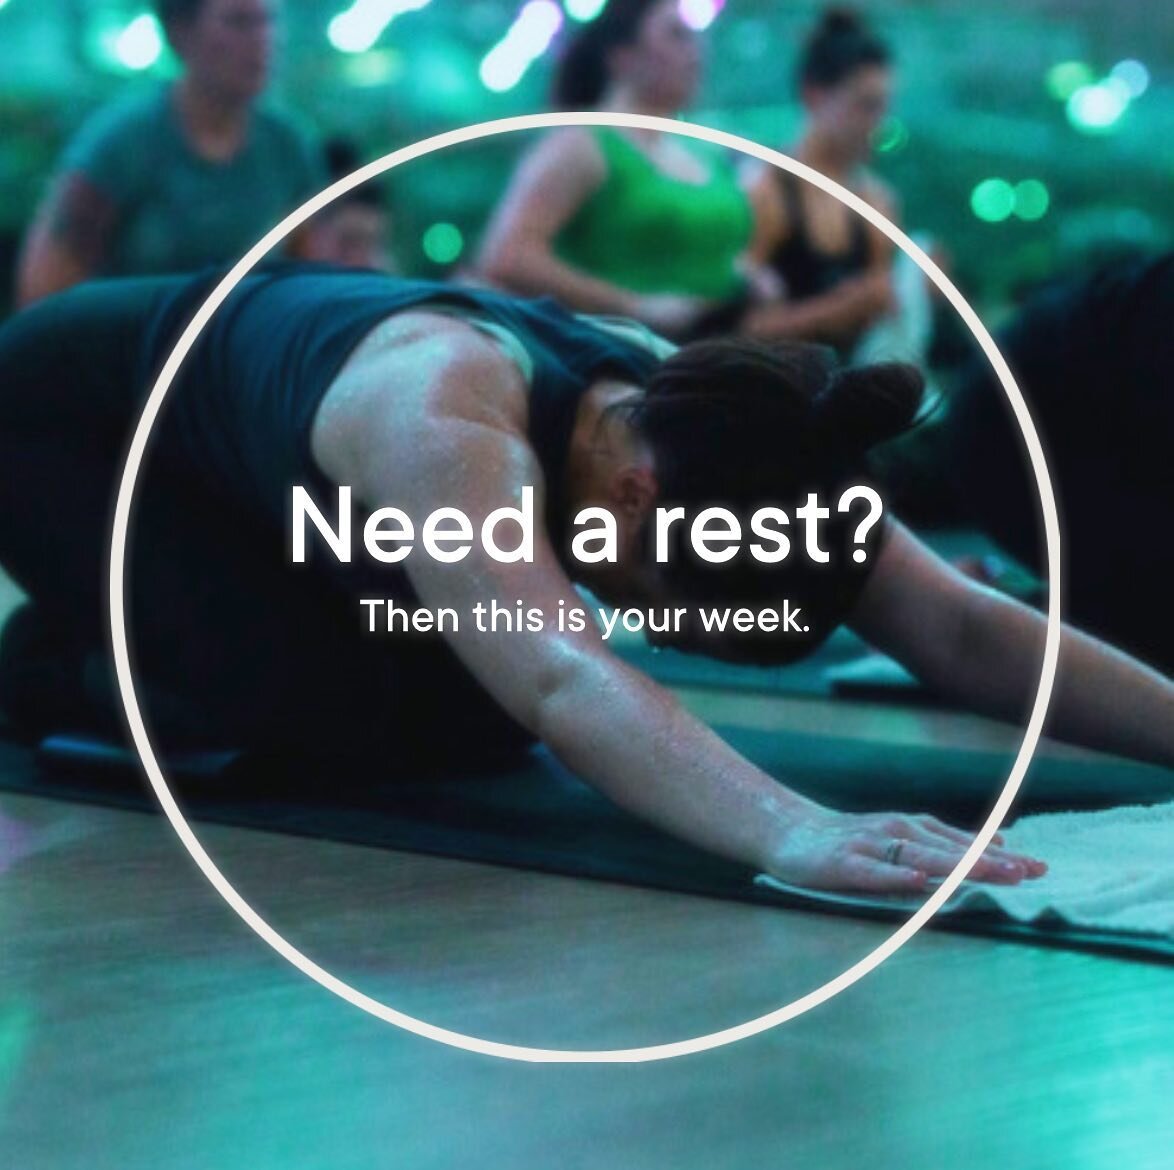 Rest and recovery is important all the time and especially so during busy holiday seasons. Rest and relaxation allows are minds and bodies to recover and rejuvenate, which is crucial for maintaining overall health and well-being. 
You&rsquo;re invite